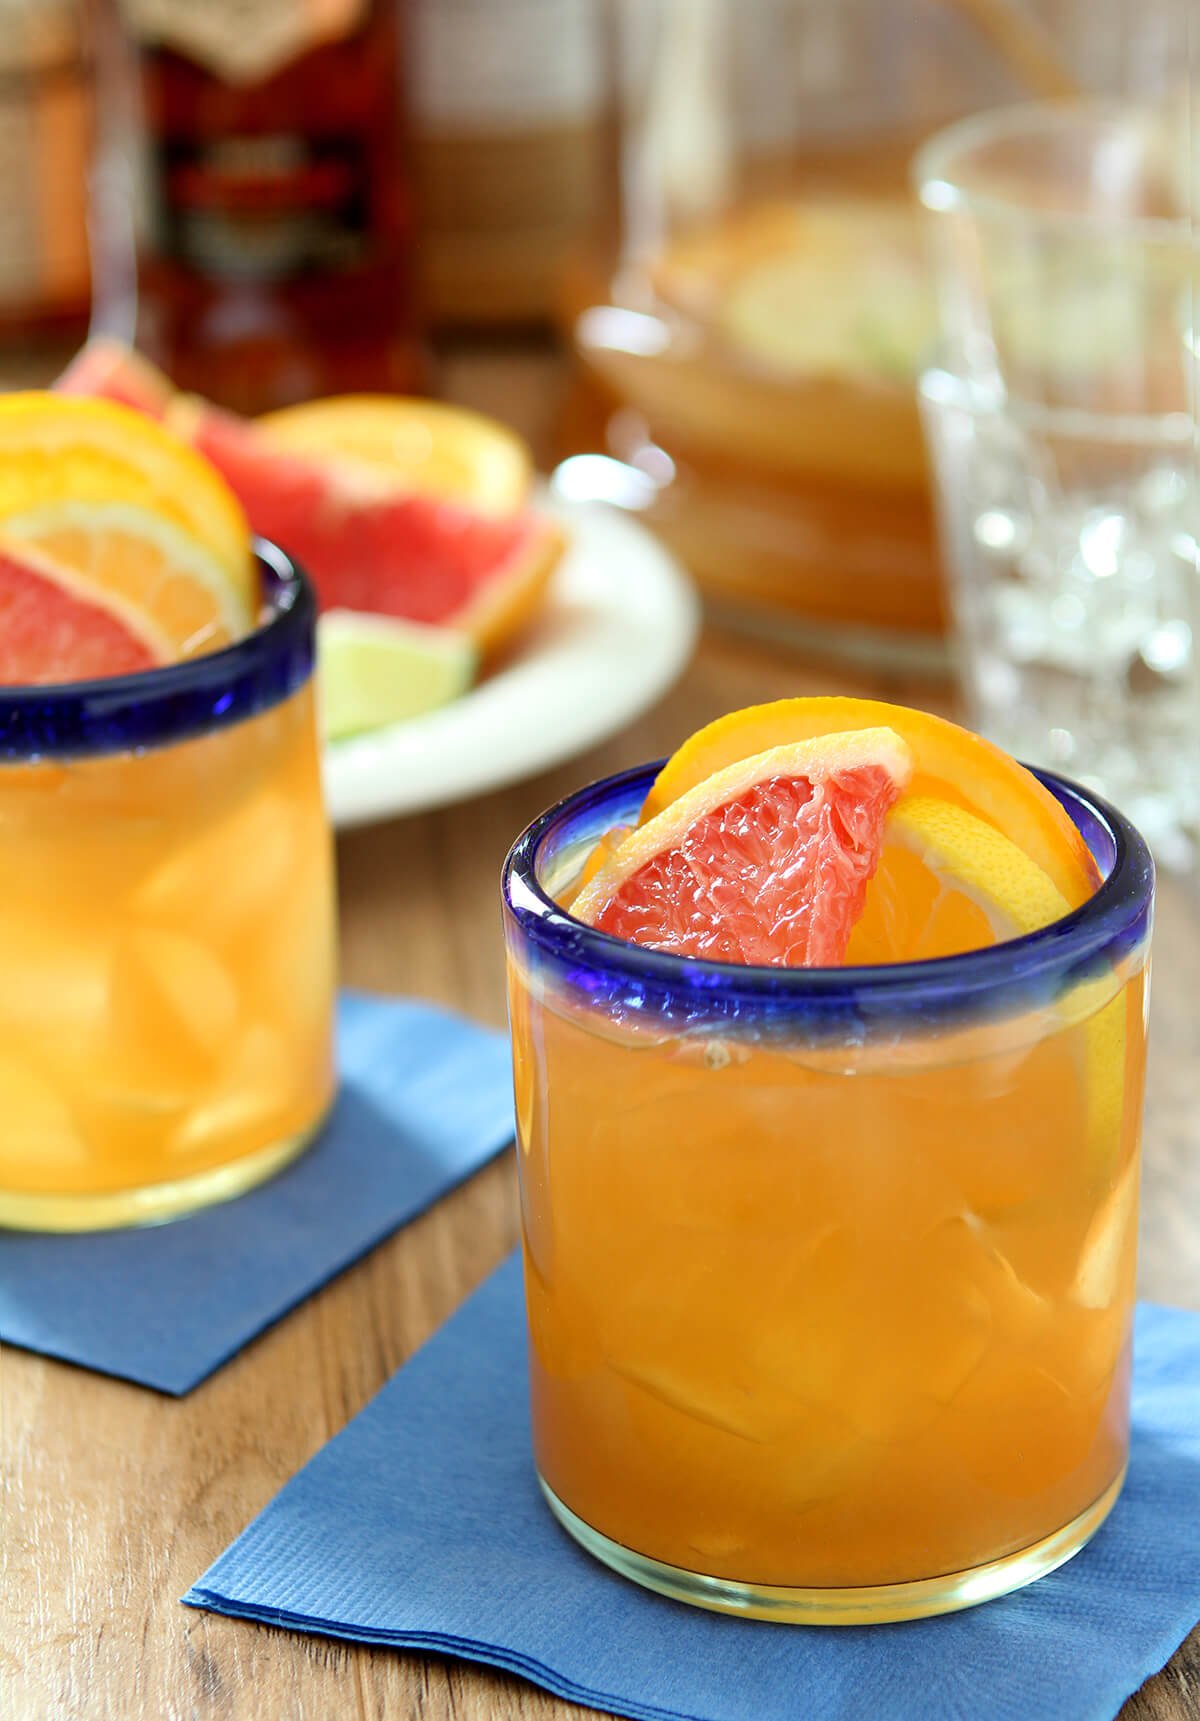 Orange Juice and Rum: Mixing Up a Classic Cocktail with Orange Juice and Rum